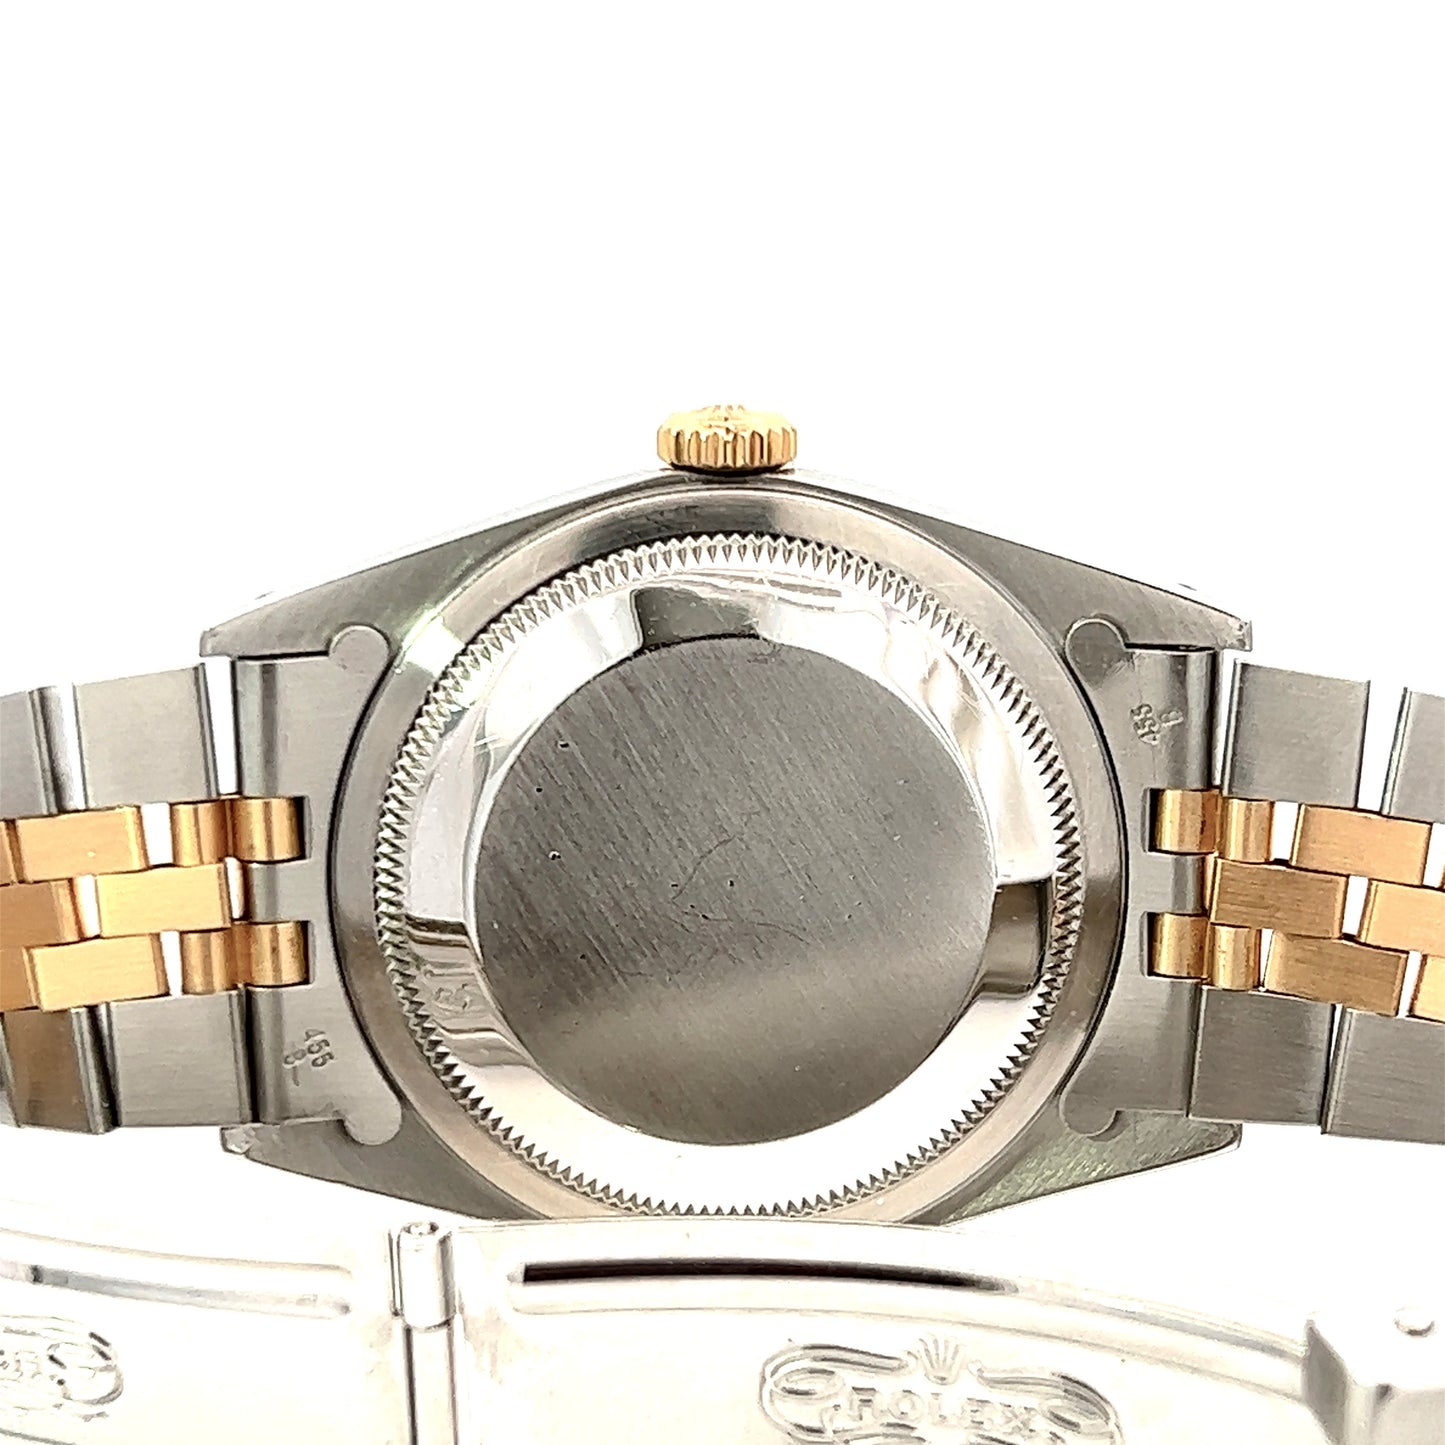 ROLEX Oyster Perpetual DATEJUST Automatic 36mm 2 Tone Diamond Watch